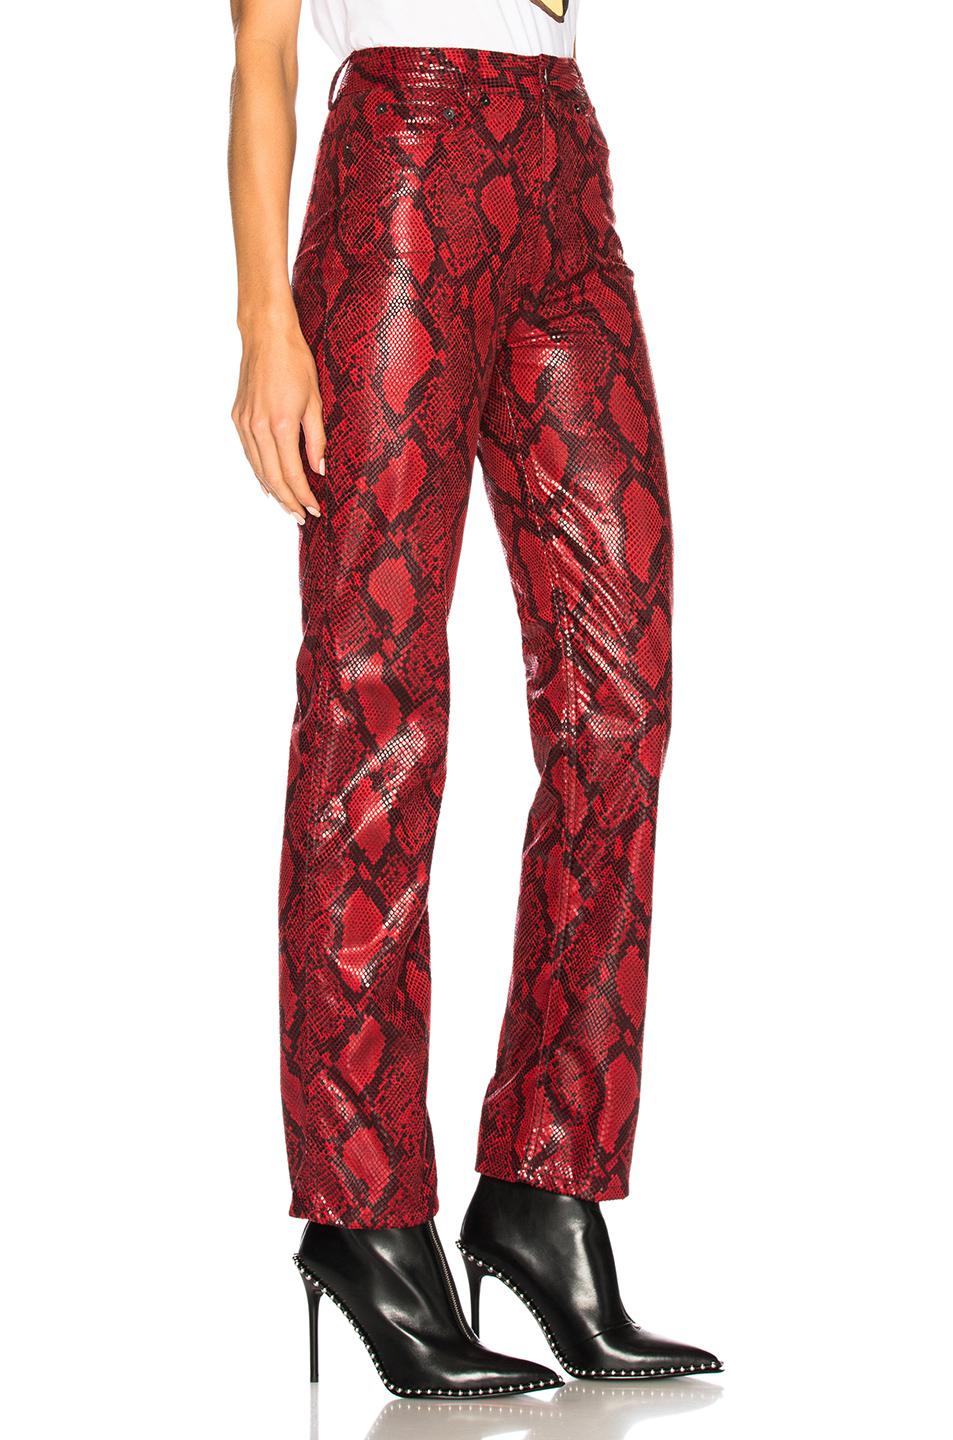 Red Snakeskin Leather Pants Discount, SAVE 60% - mpgc.net